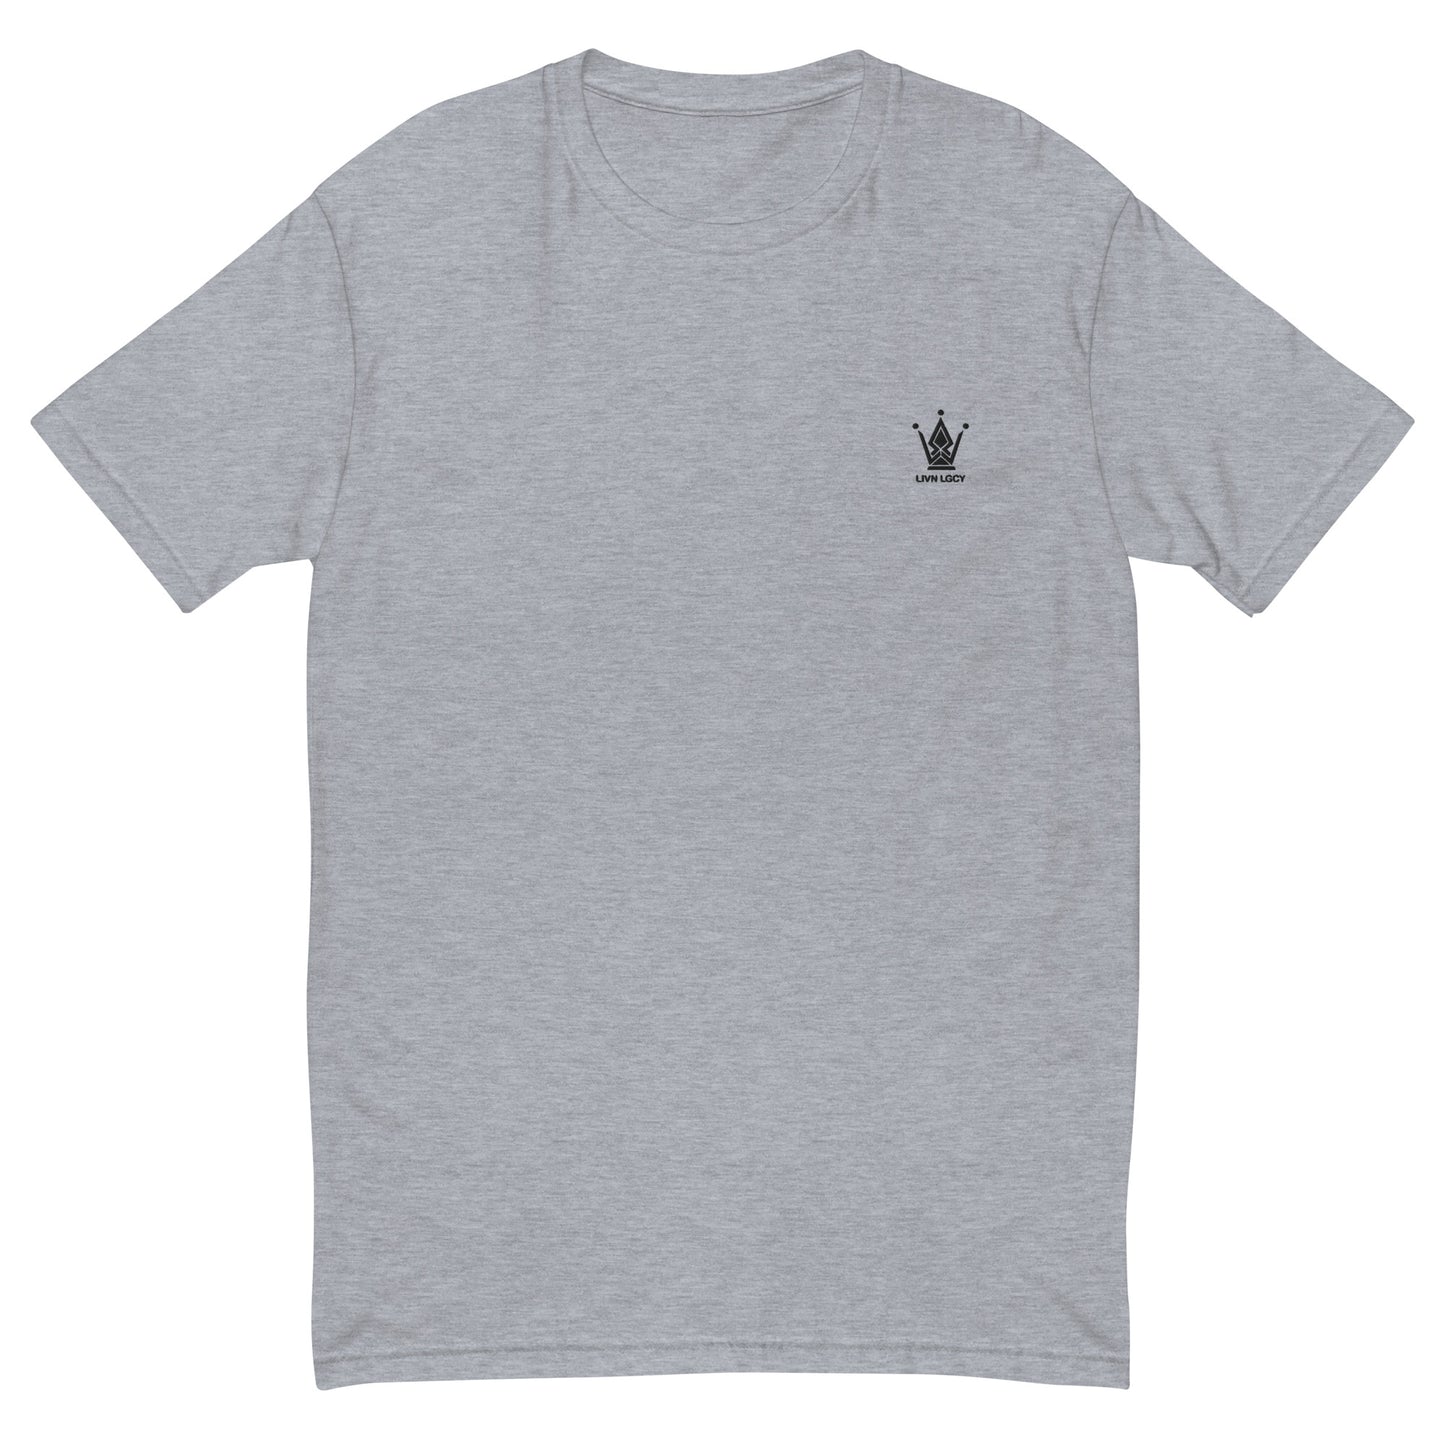 Marble Grey Fitted Emblem Tee